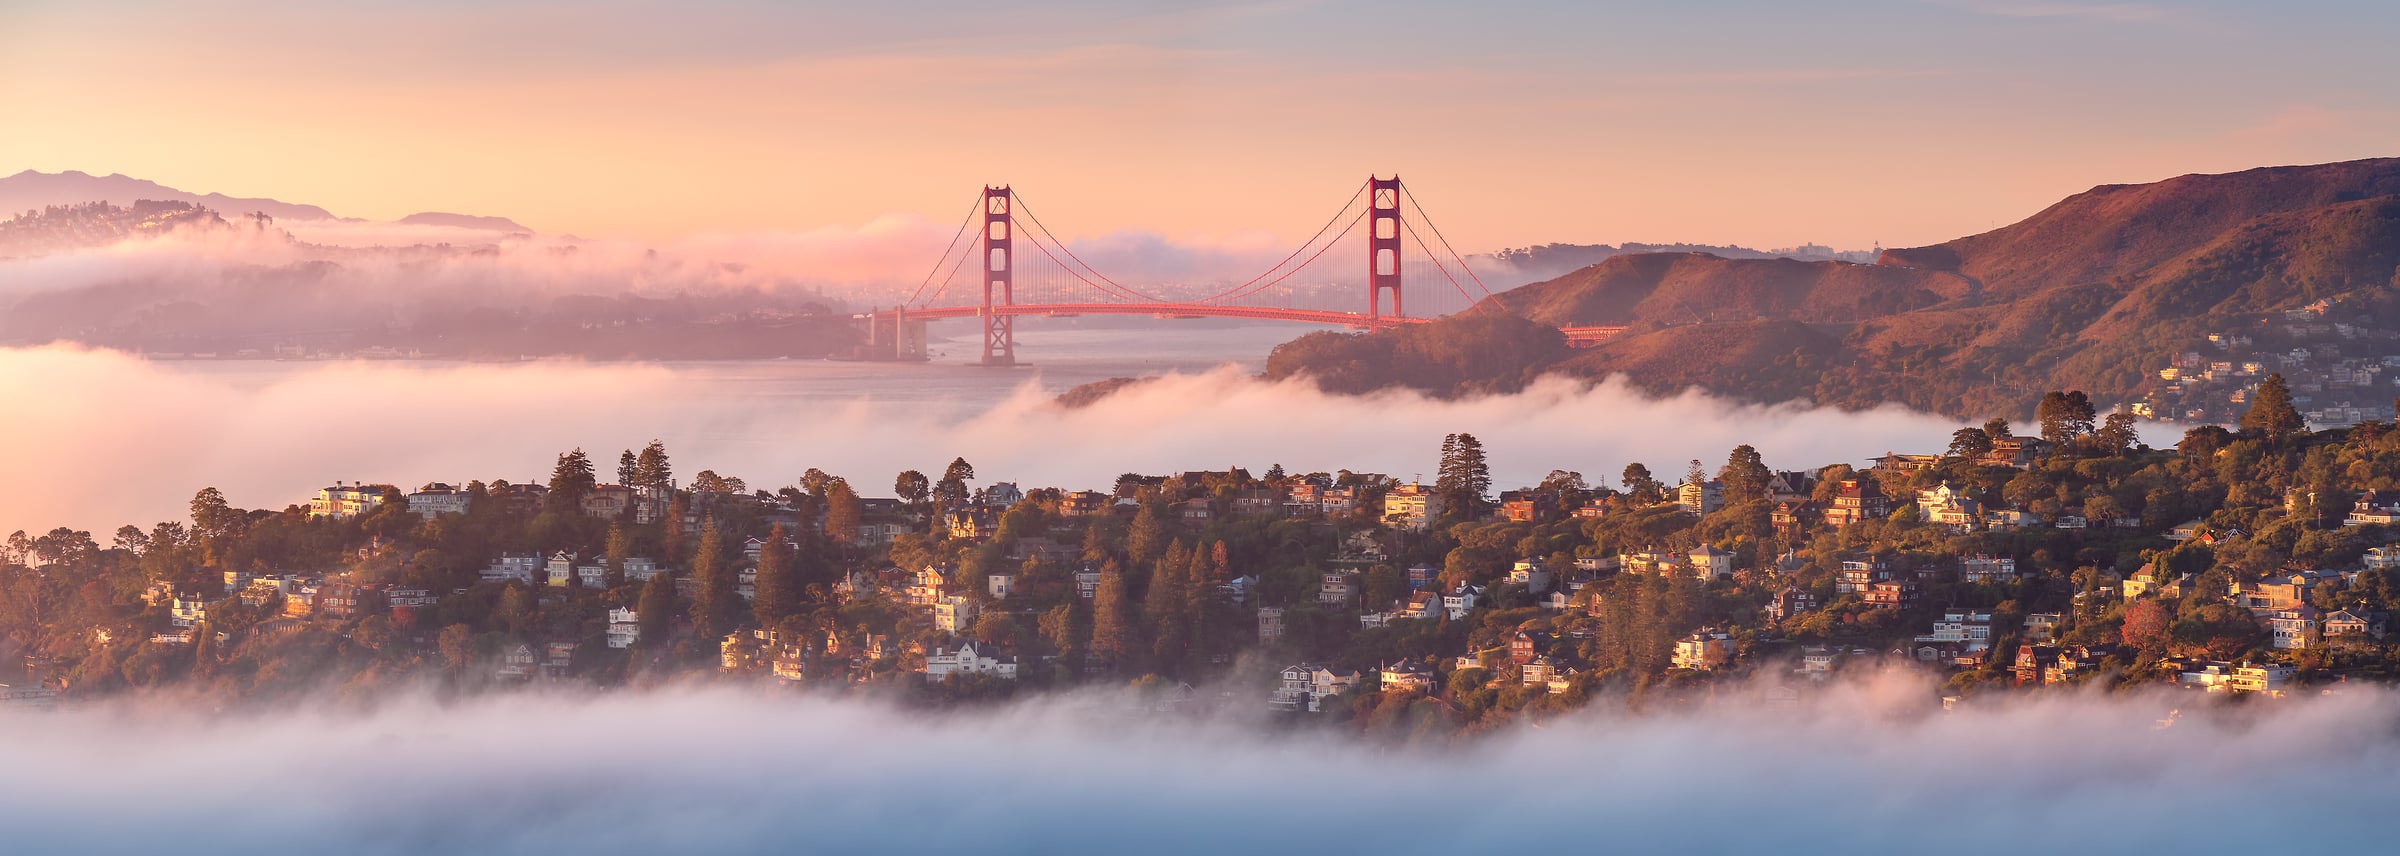 107 megapixels! A very high resolution, large-format VAST photo of Tiburon, California with the Golden Gate Bridge in the background; landscape photograph created by Jeff Lewis.